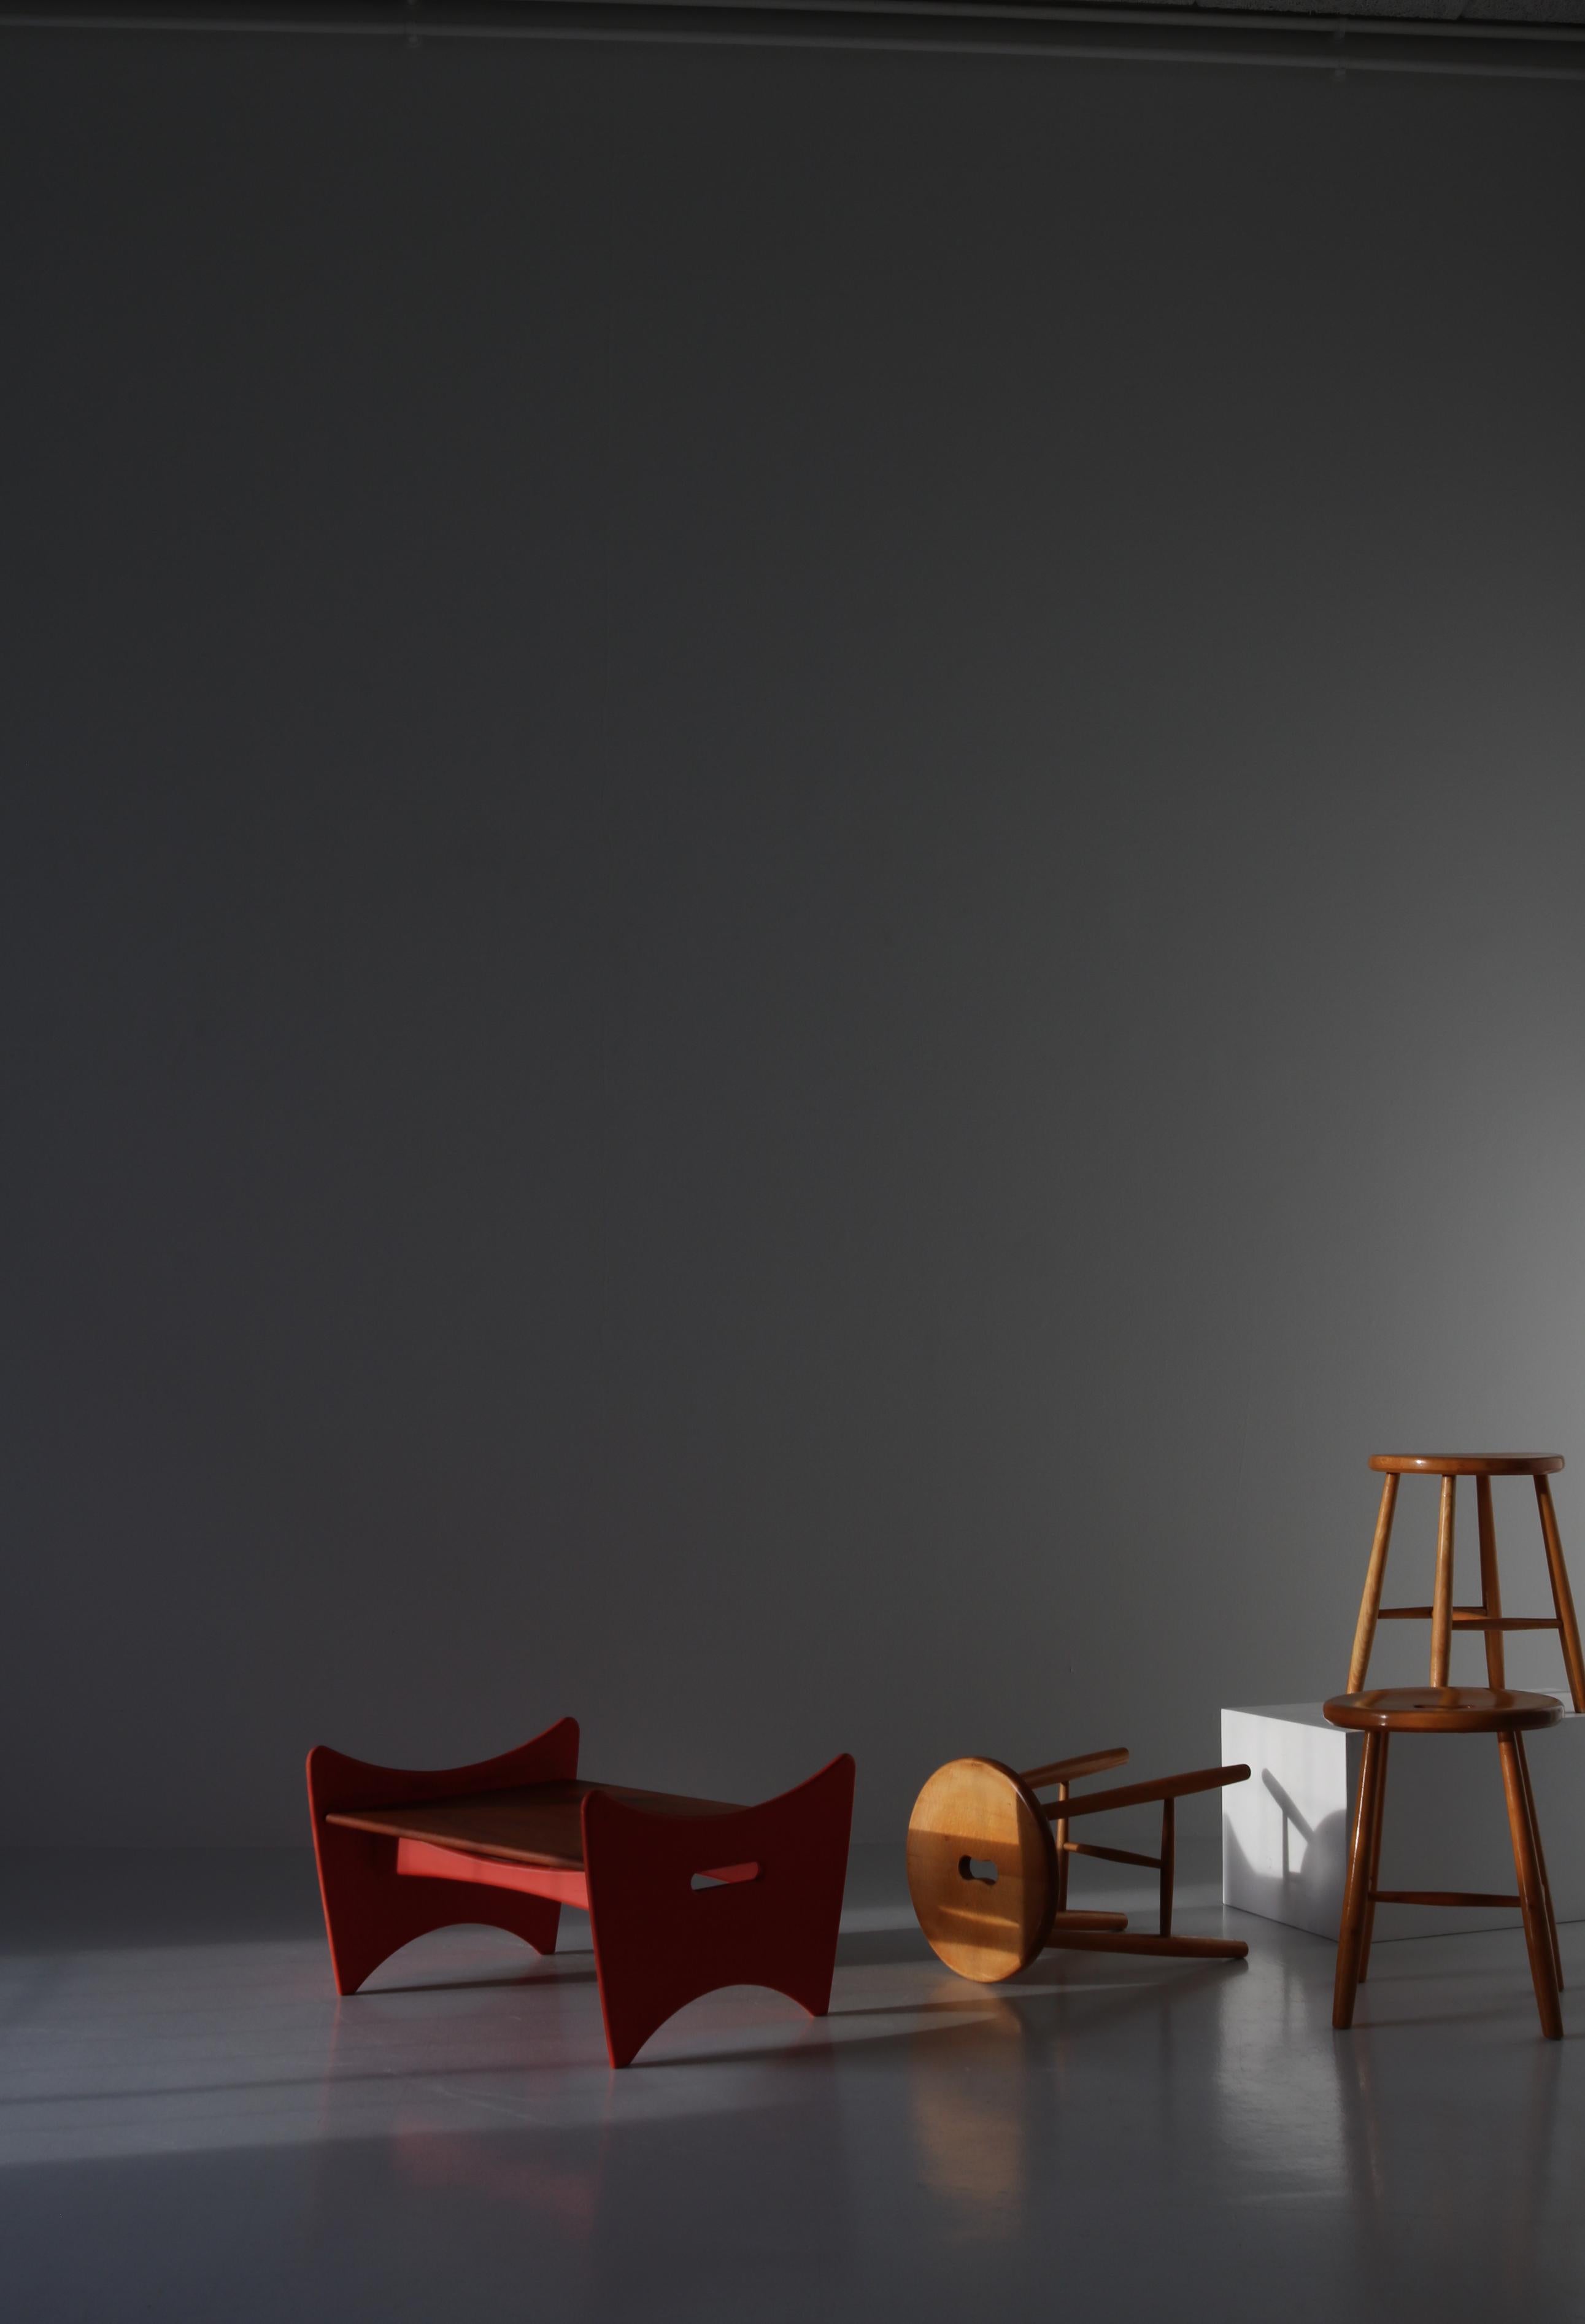 Wonderful Scandinavian Modern side table or stool by Danish architect Illum Wikkelsø. The stool is made from red lacquered wood and teakwood and features a big upholstered cushion in black leather. This piece was a part of a series of experimental